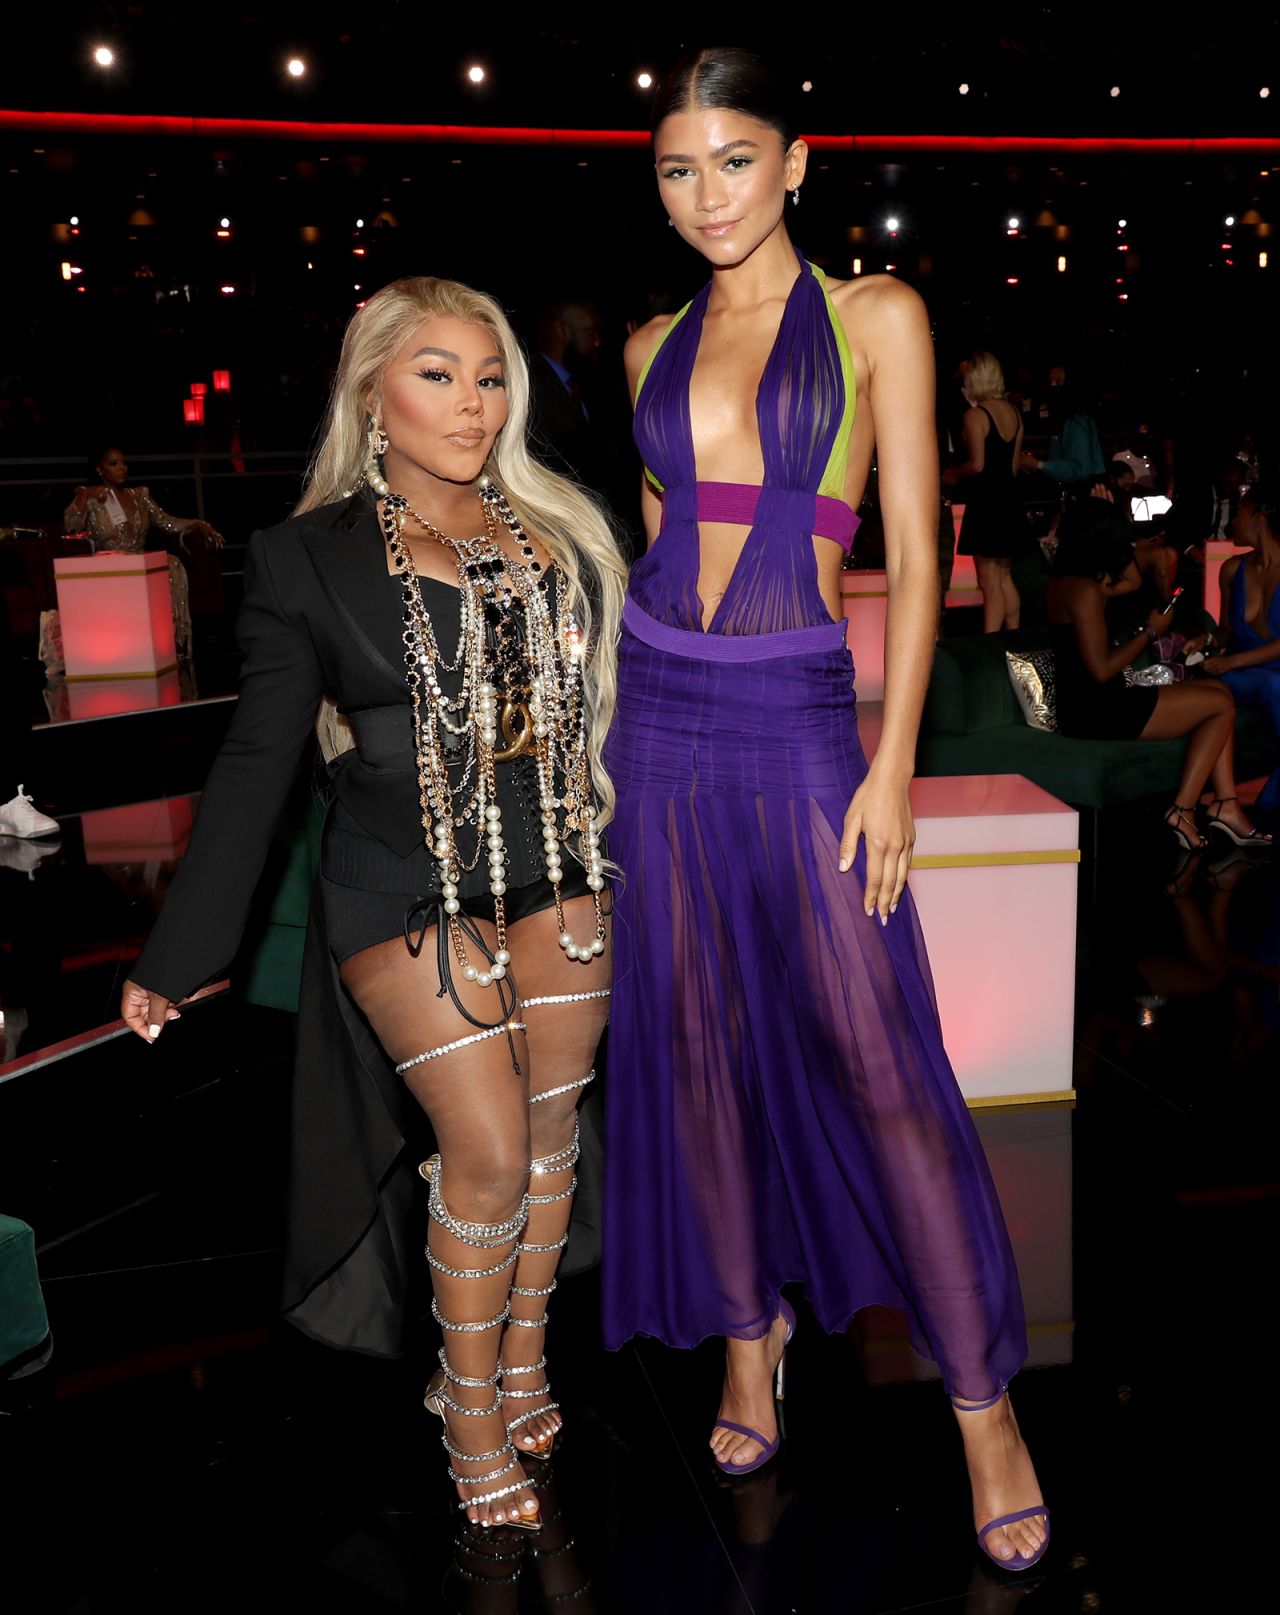 Zendaya wearing a 2003 Versace dress as she poses with rapper Lil Kim at the BET Awards.